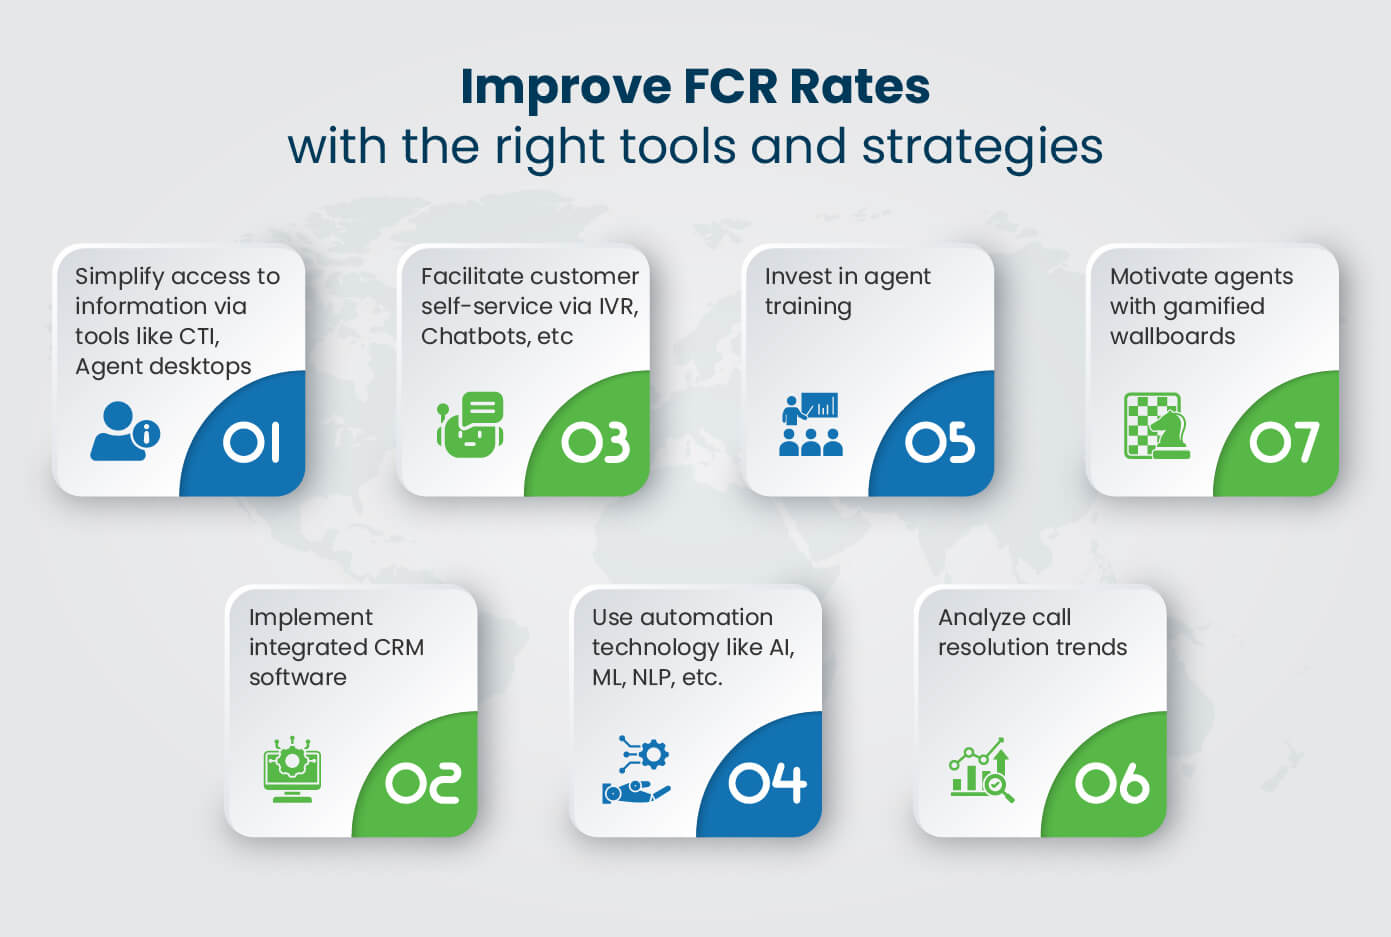 Improve FCR Rates with the right tools and strategies